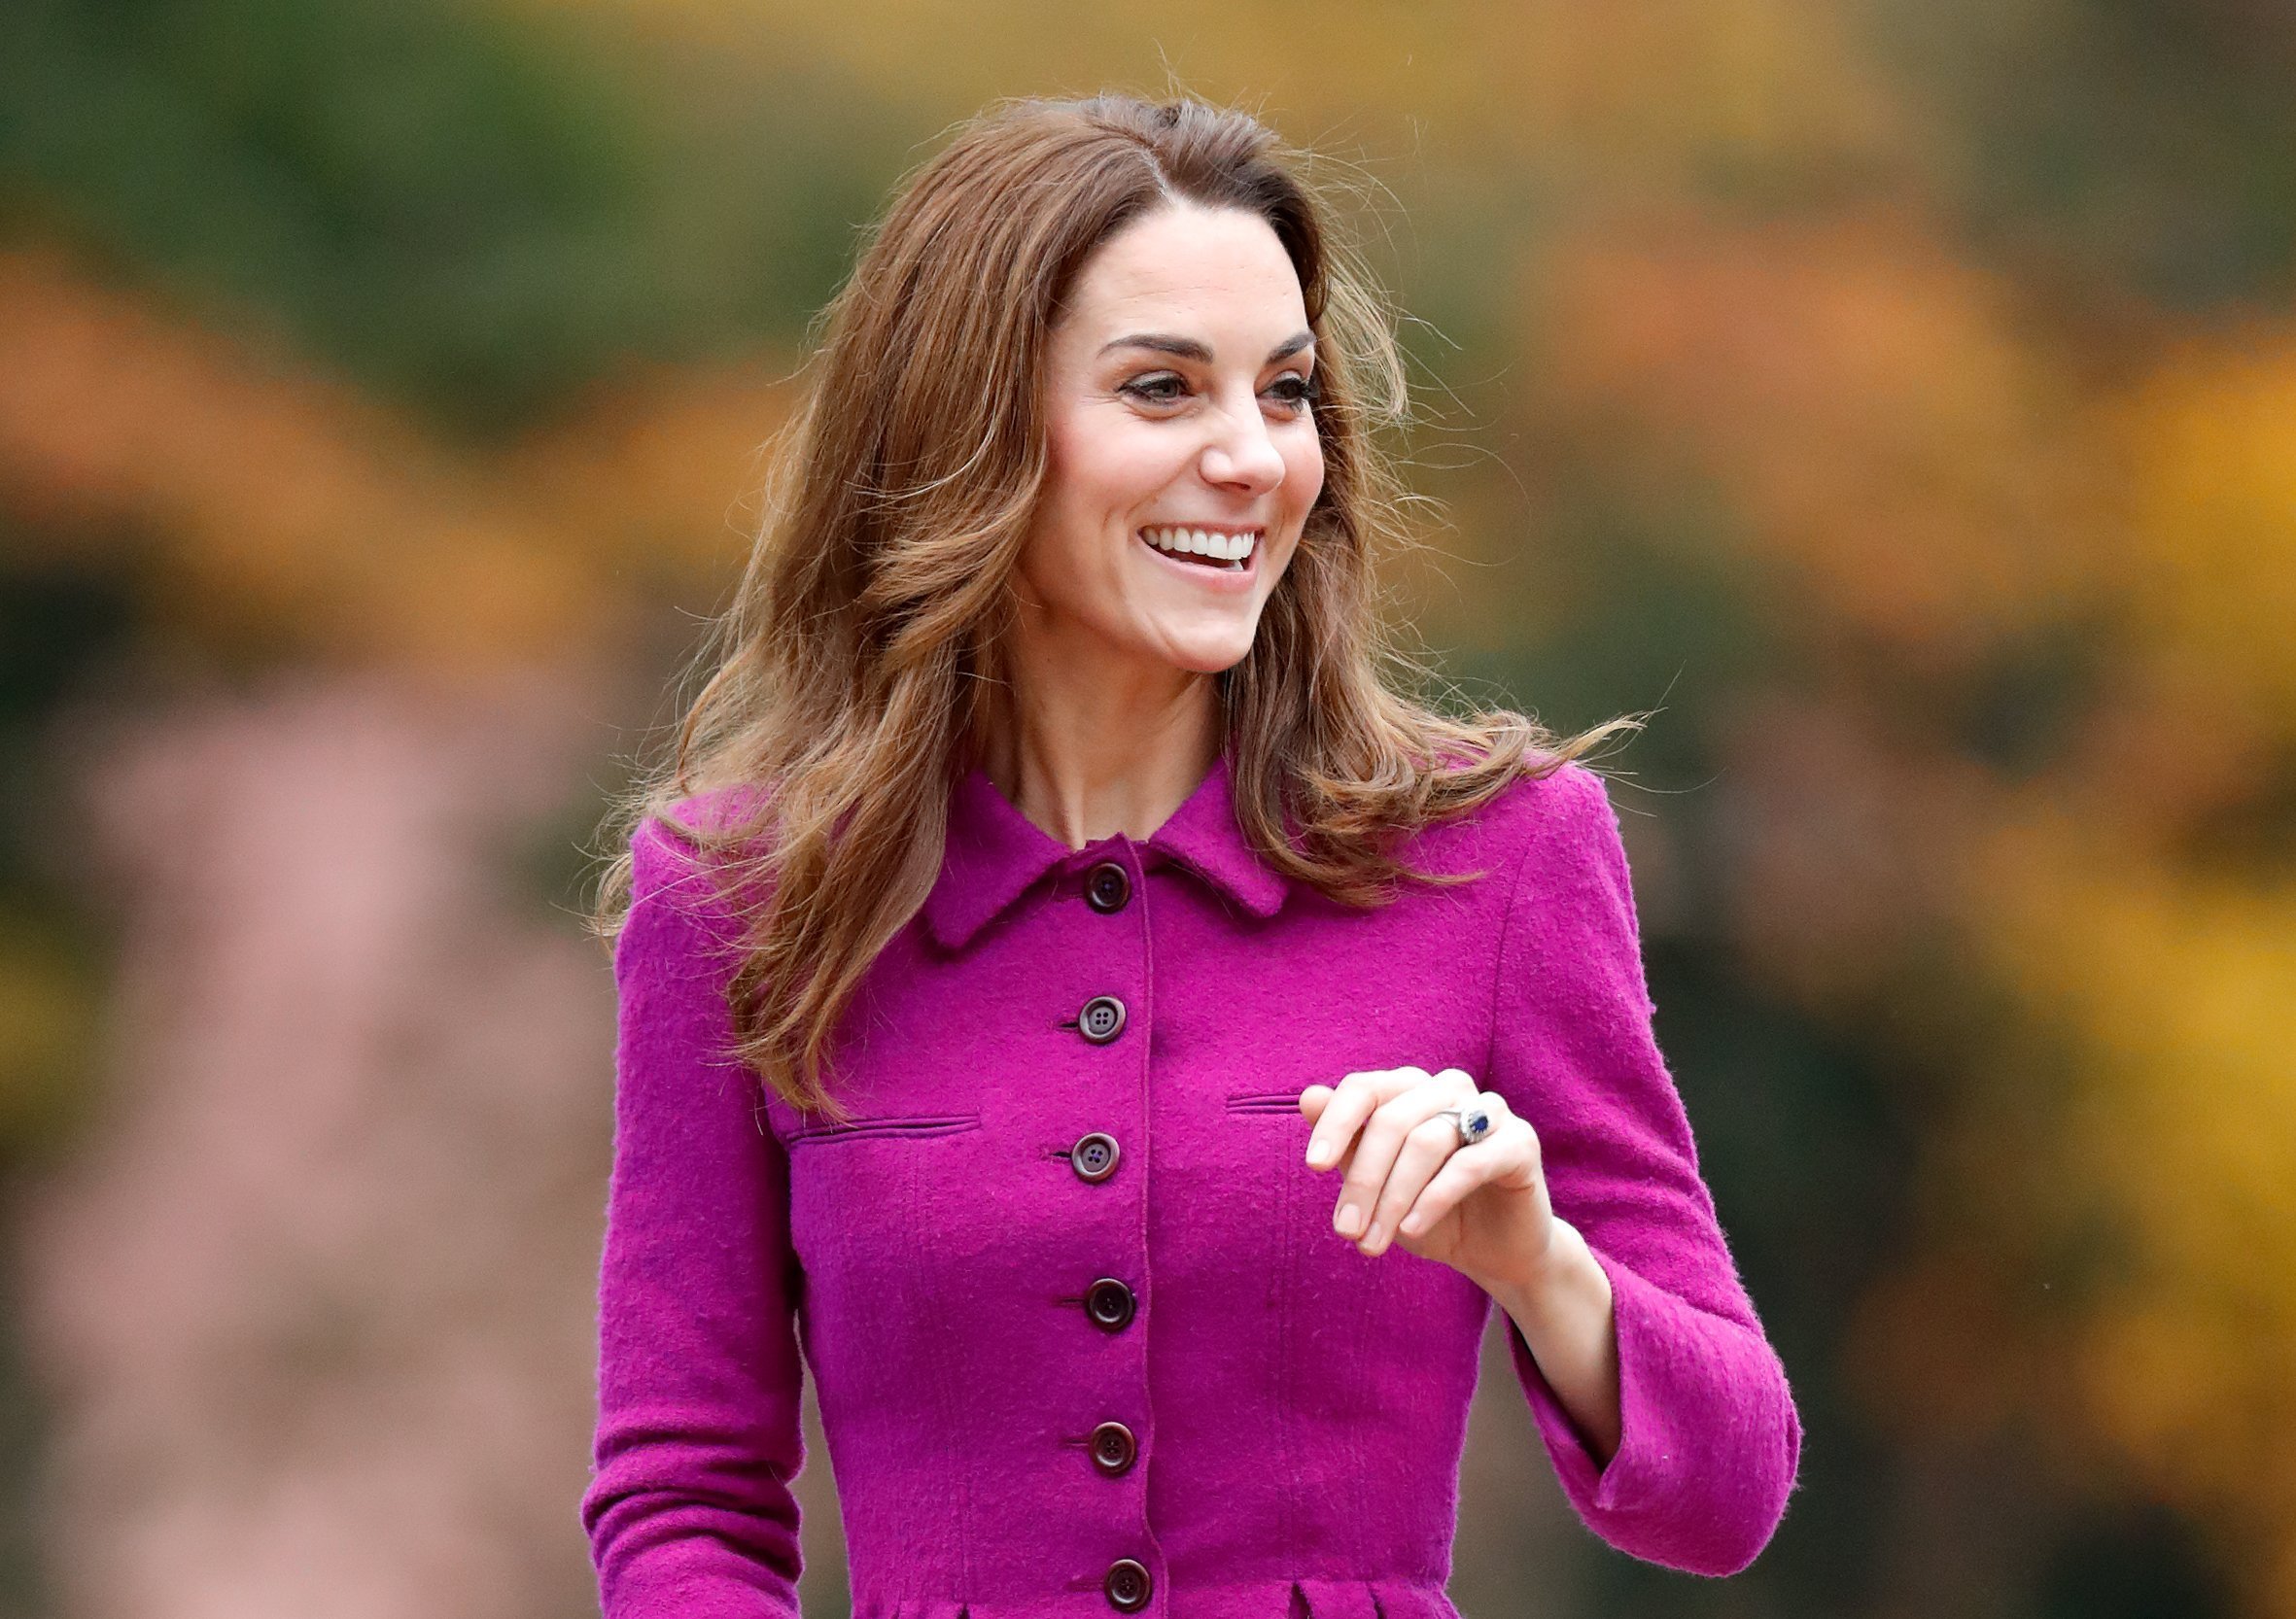 Kate Middleton attends the opening of a Children's Hospice in London, England on November 15, 2019 | Photo: Getty Images